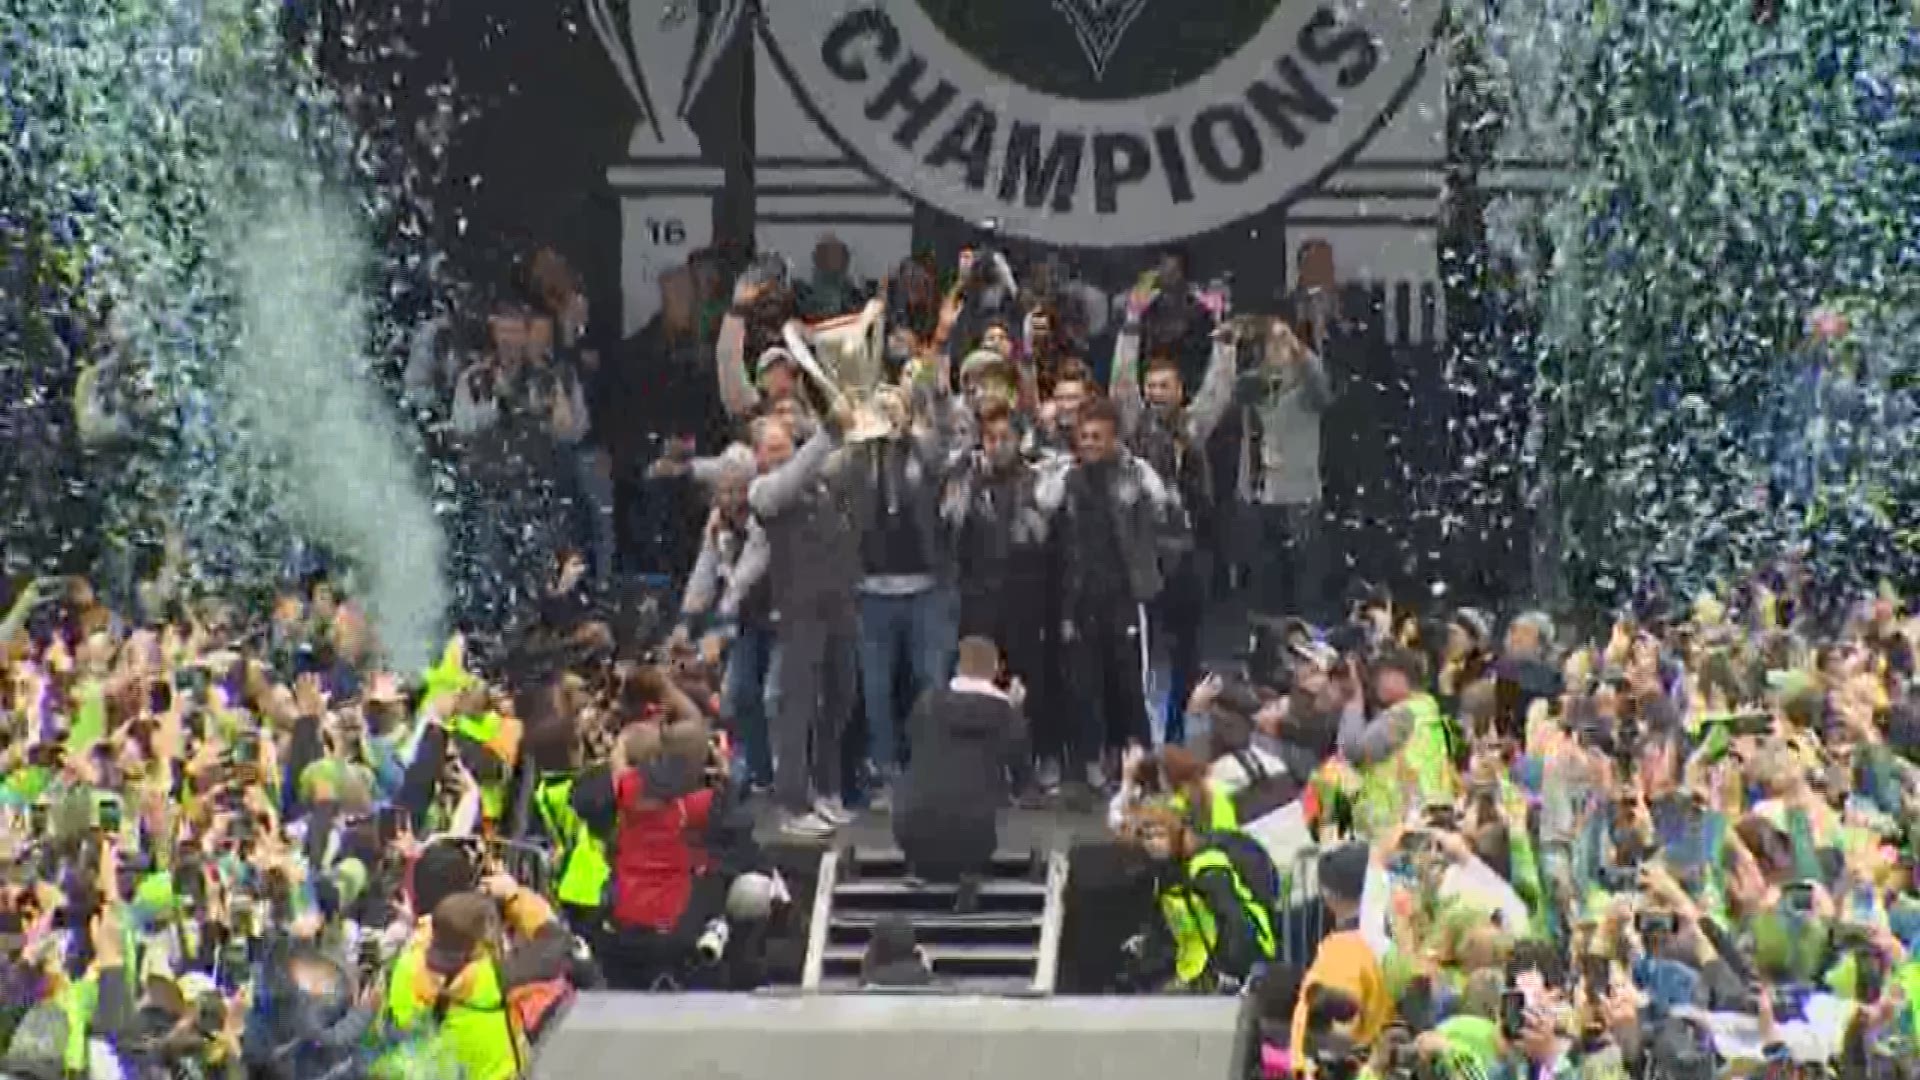 The Seattle Sounders celebrated their win with a parade through downtown and a rally at Seattle Center